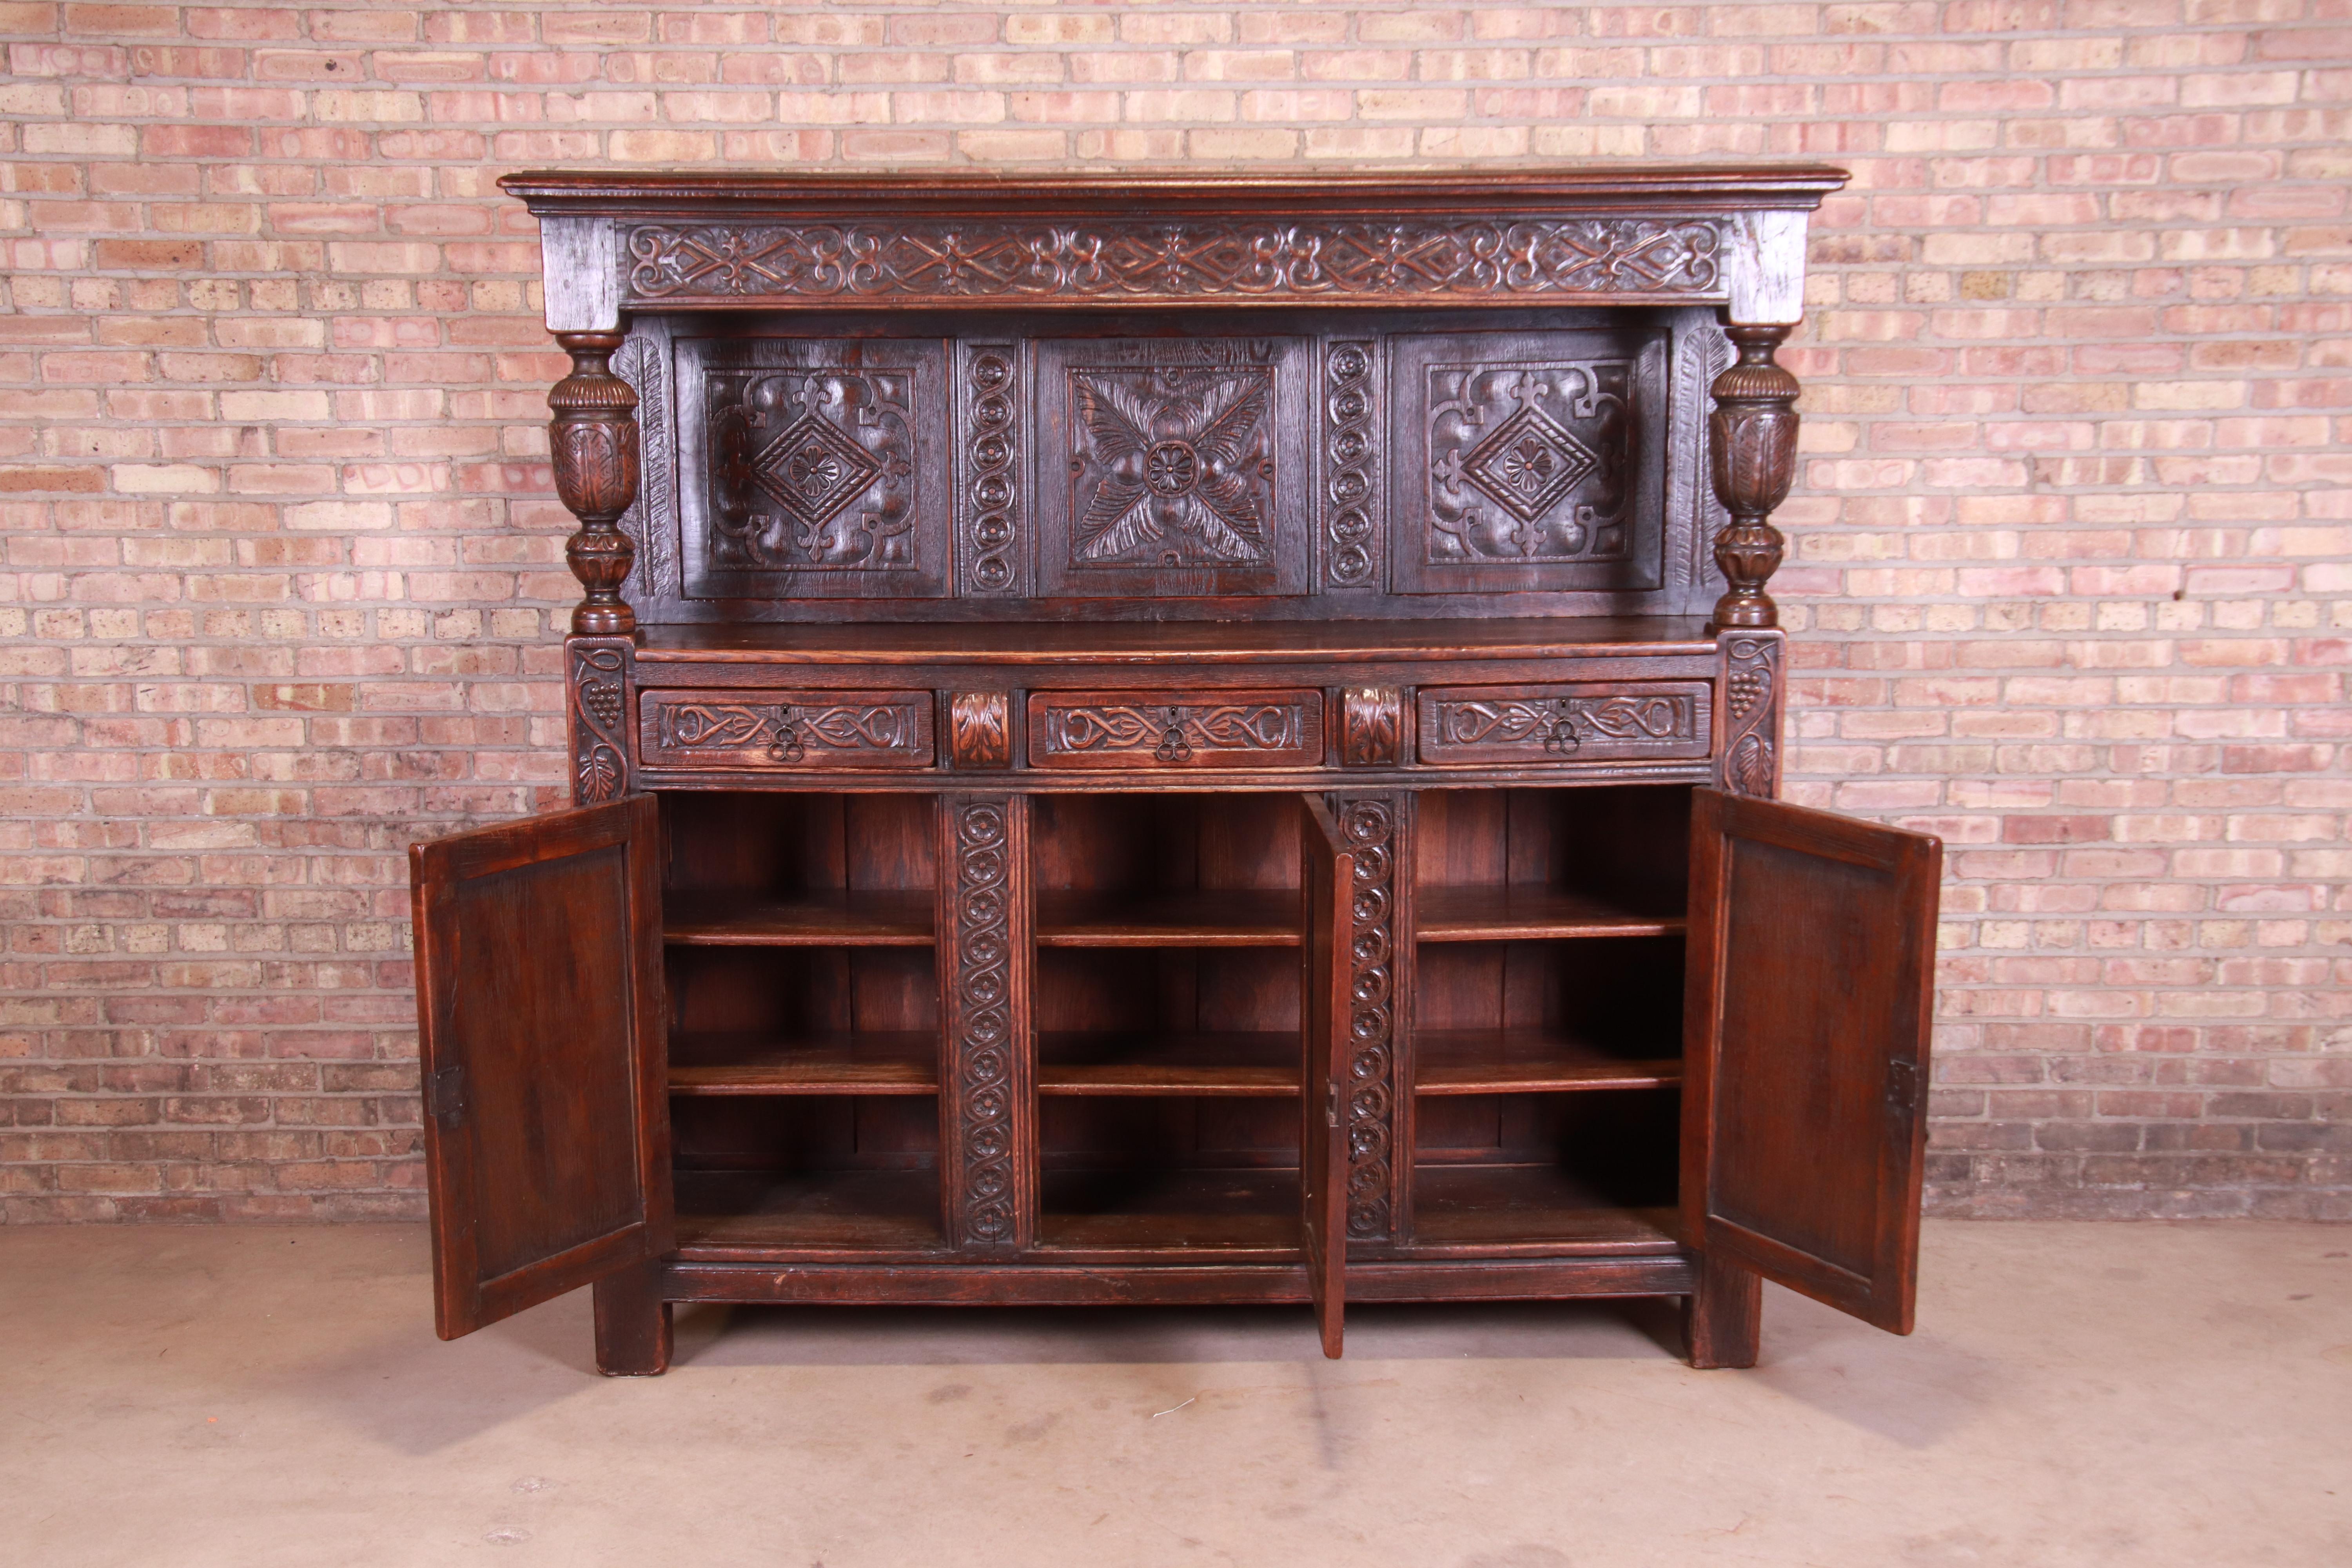 Wrought Iron Antique Italian Ornate Carved Oak Sideboard or Bar Cabinet, circa 1800